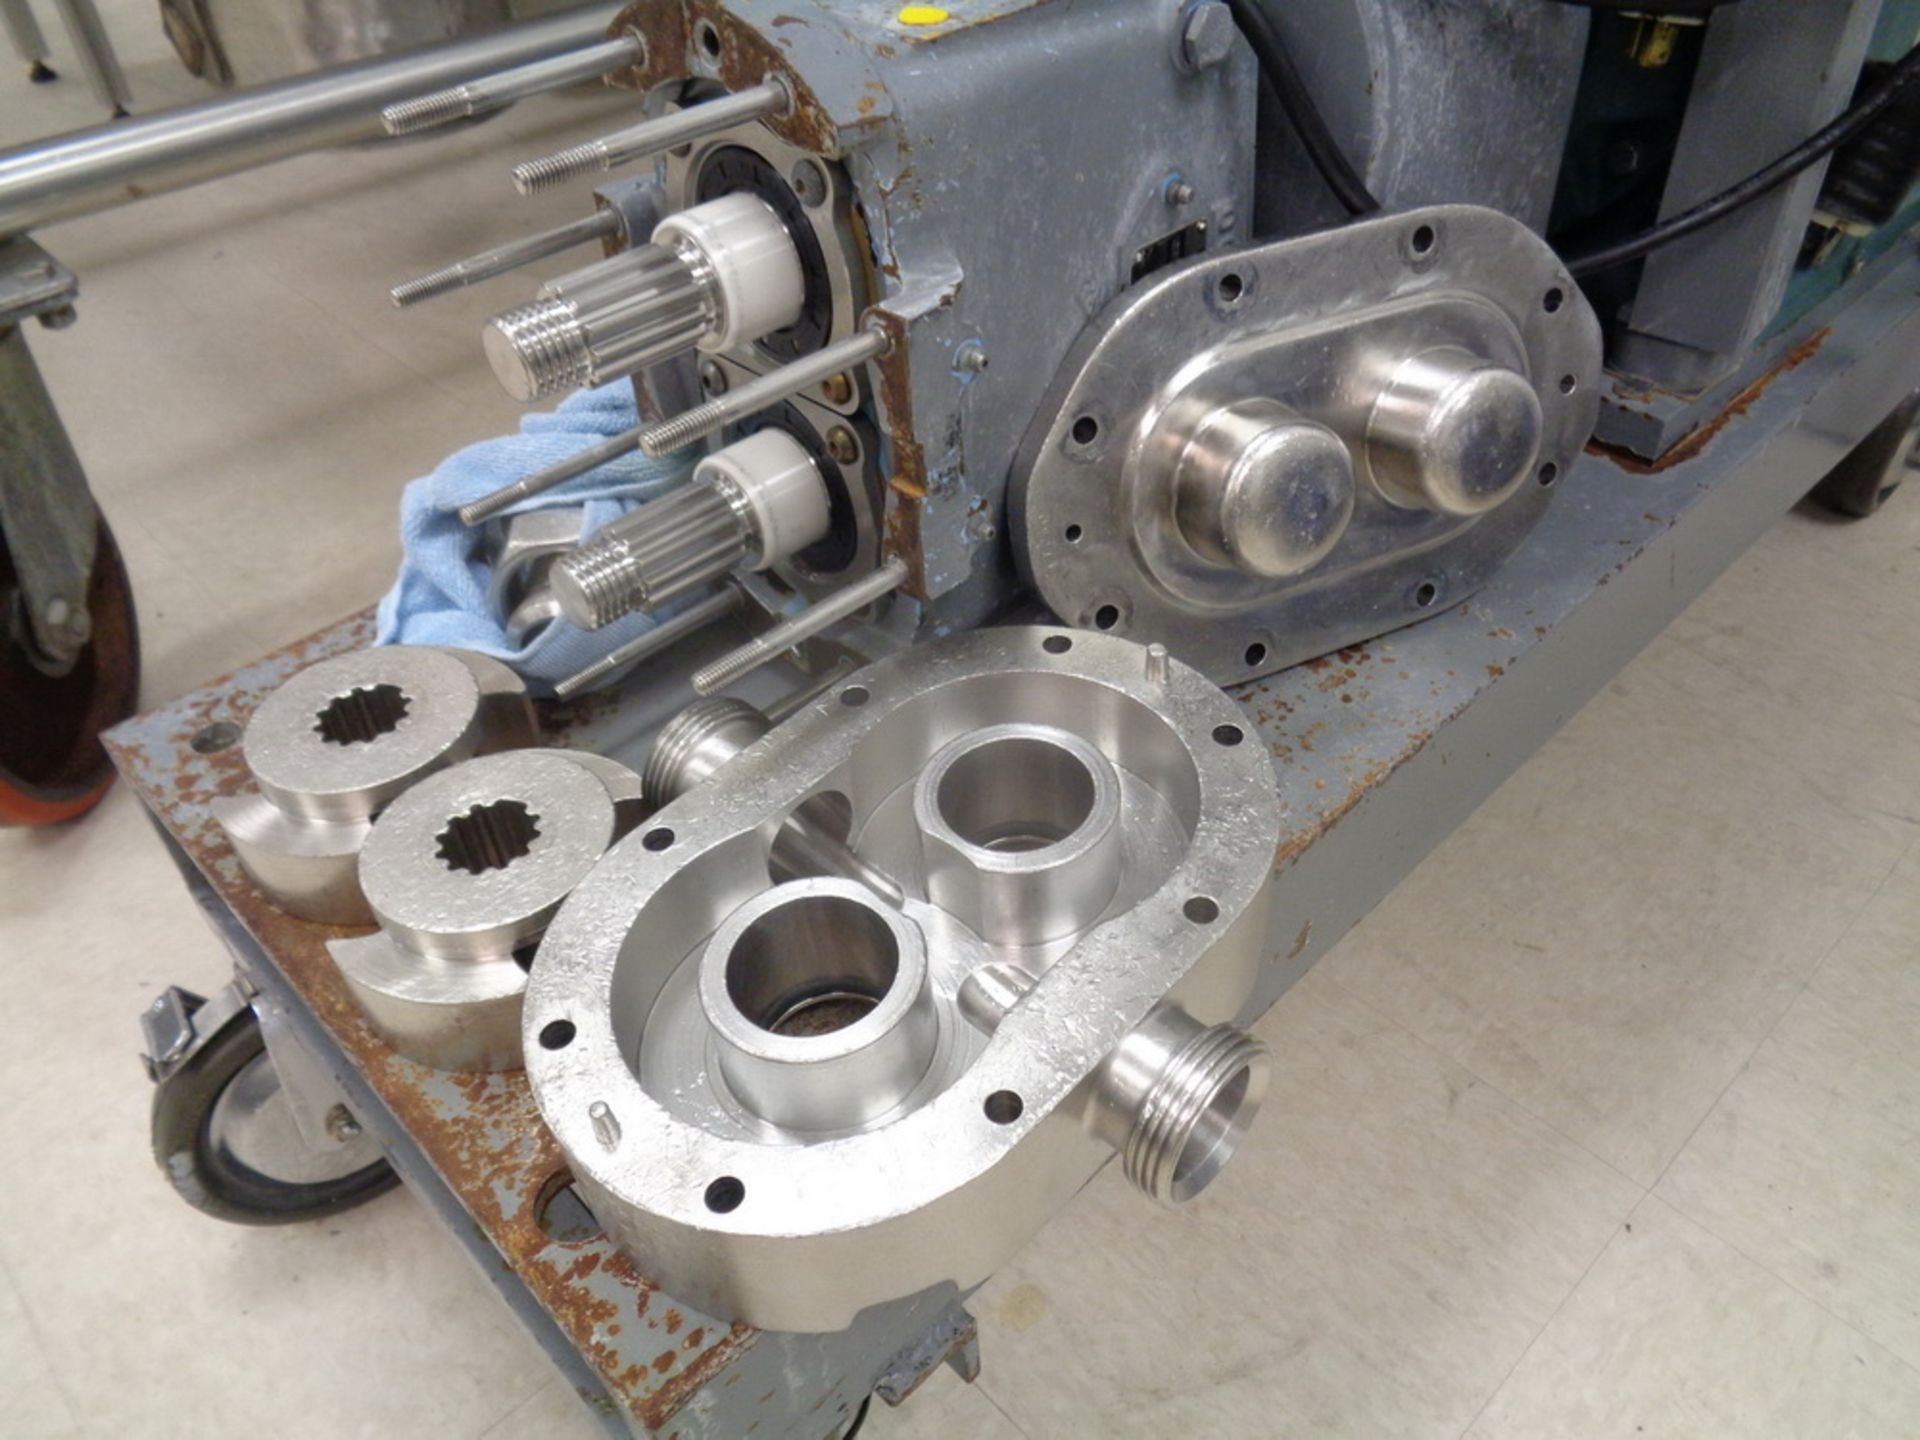 WAUKESHA POSITIVE DISPLACEMENT PUMP, MODEL 30, SERIAL NUMBER 277280, STAINLESS STEEL CONTACT - Image 2 of 5